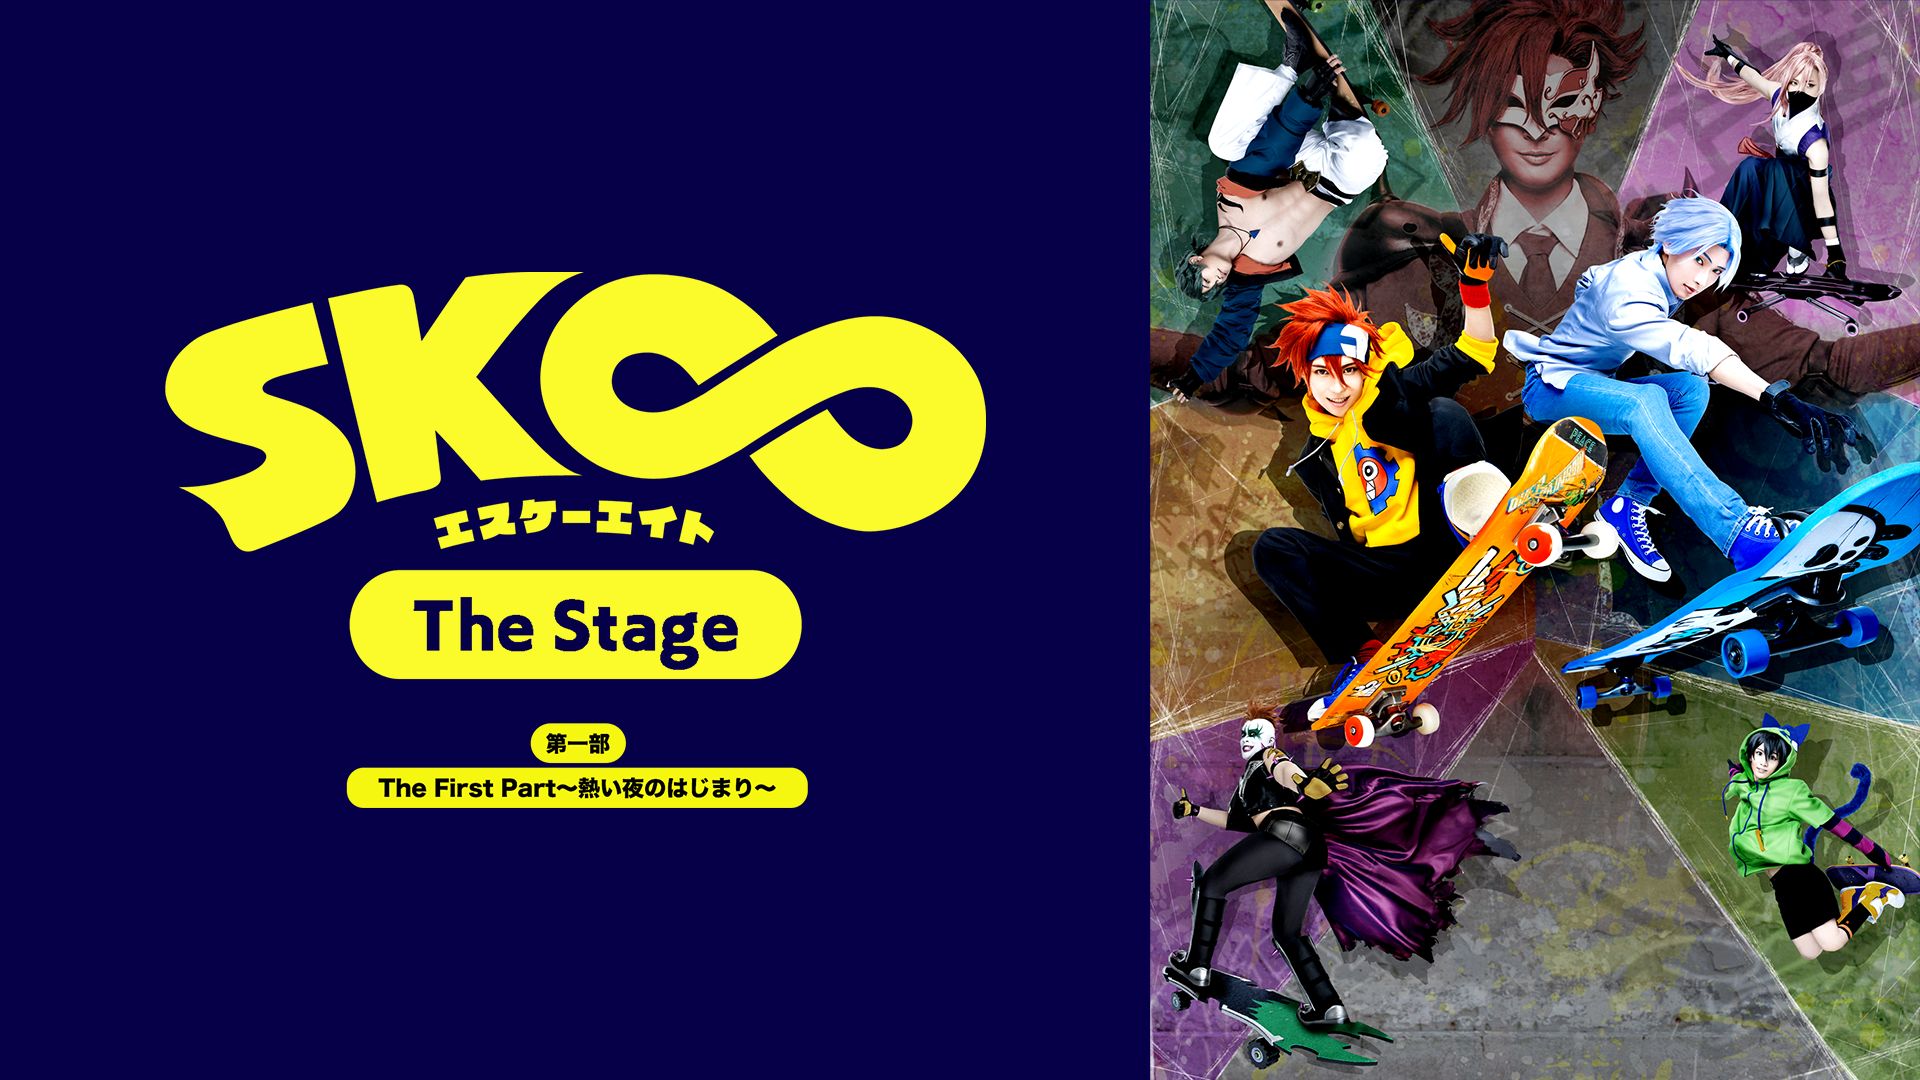 SK∞ エスケーエイト The Stage」第一部:The First Part〜熱い夜のはじまり〜